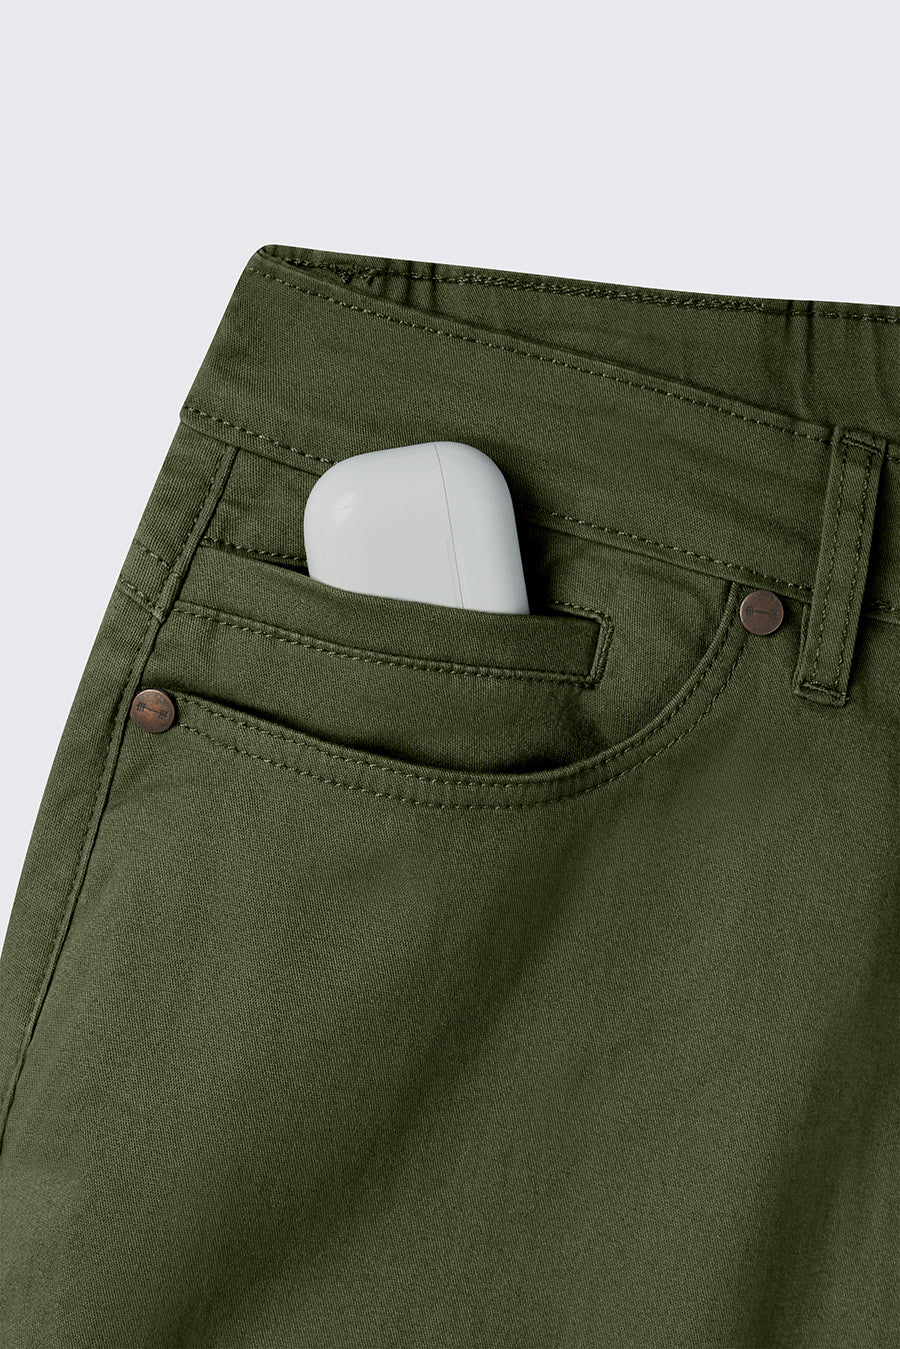 Athletic Fit Chino Pant 2.0 - Drab - photo from front pocket detail #color_drab